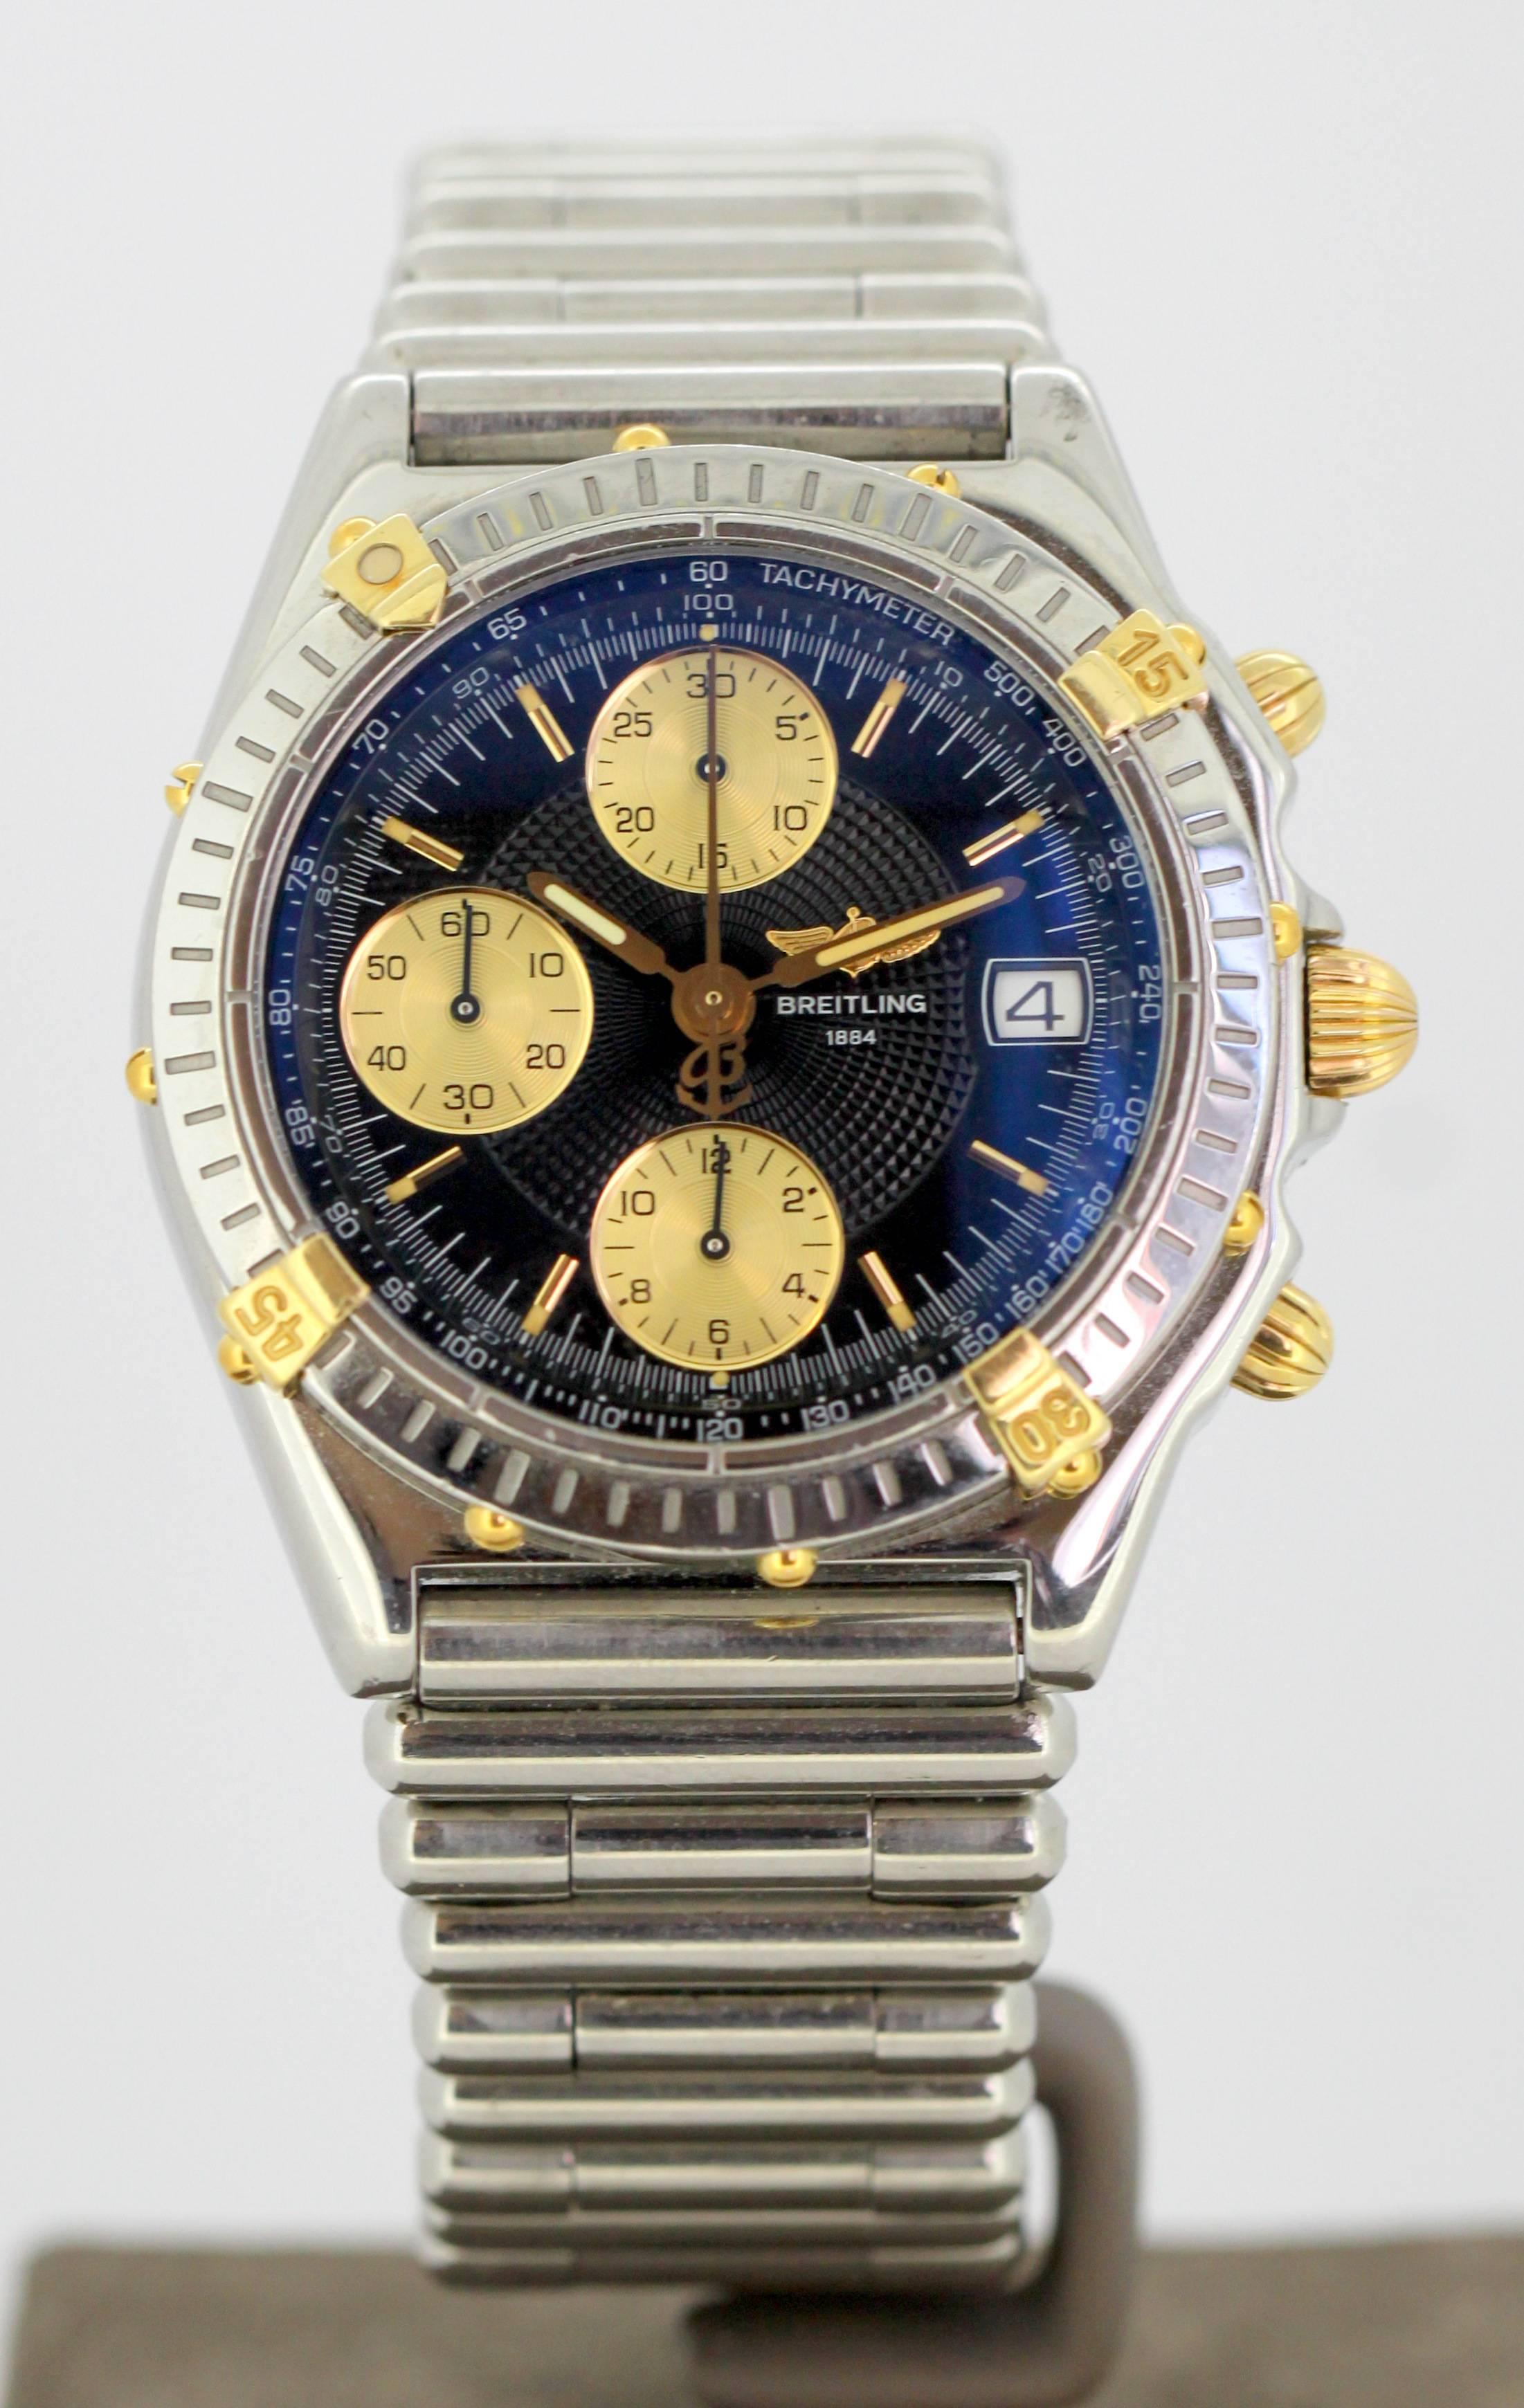 Breitling Chronomat Wristwatch, Automatic Chronograph, 18K Gold & Stainless Steel
Original Breitling stainless steel bullet band.

Watch Nr : B13050.1
Ref Nr : 203048

Comes with box and all documents, as well as extra bracelet links.
PLEASE NOTE :